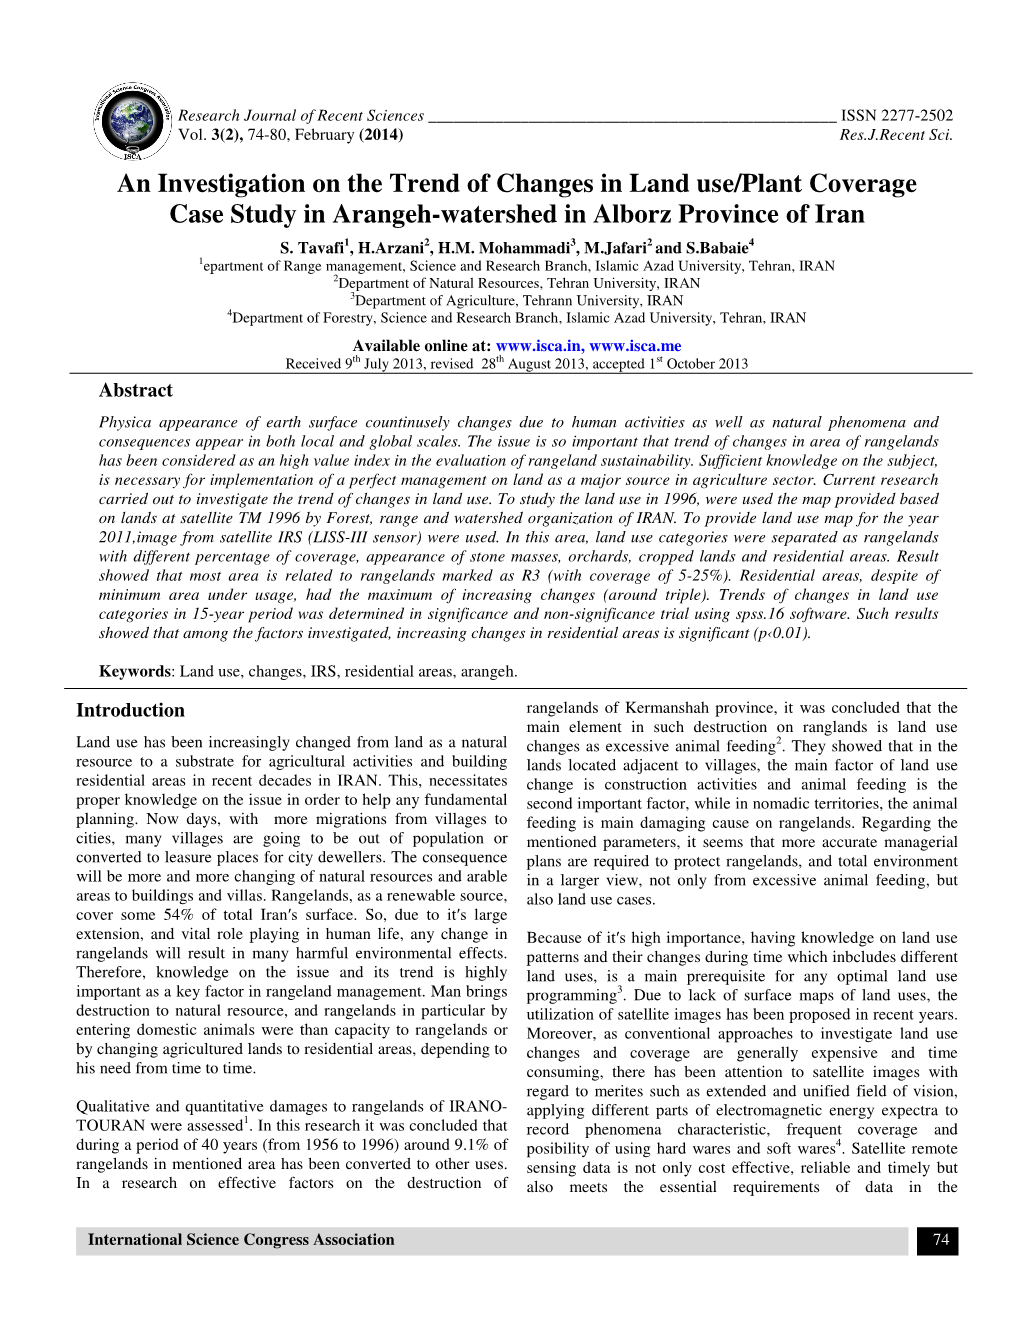 An Investigation on the Trend of Changes in Land Use/Plant Coverage Case Study in Arangeh-Watershed in Alborz Province of Iran